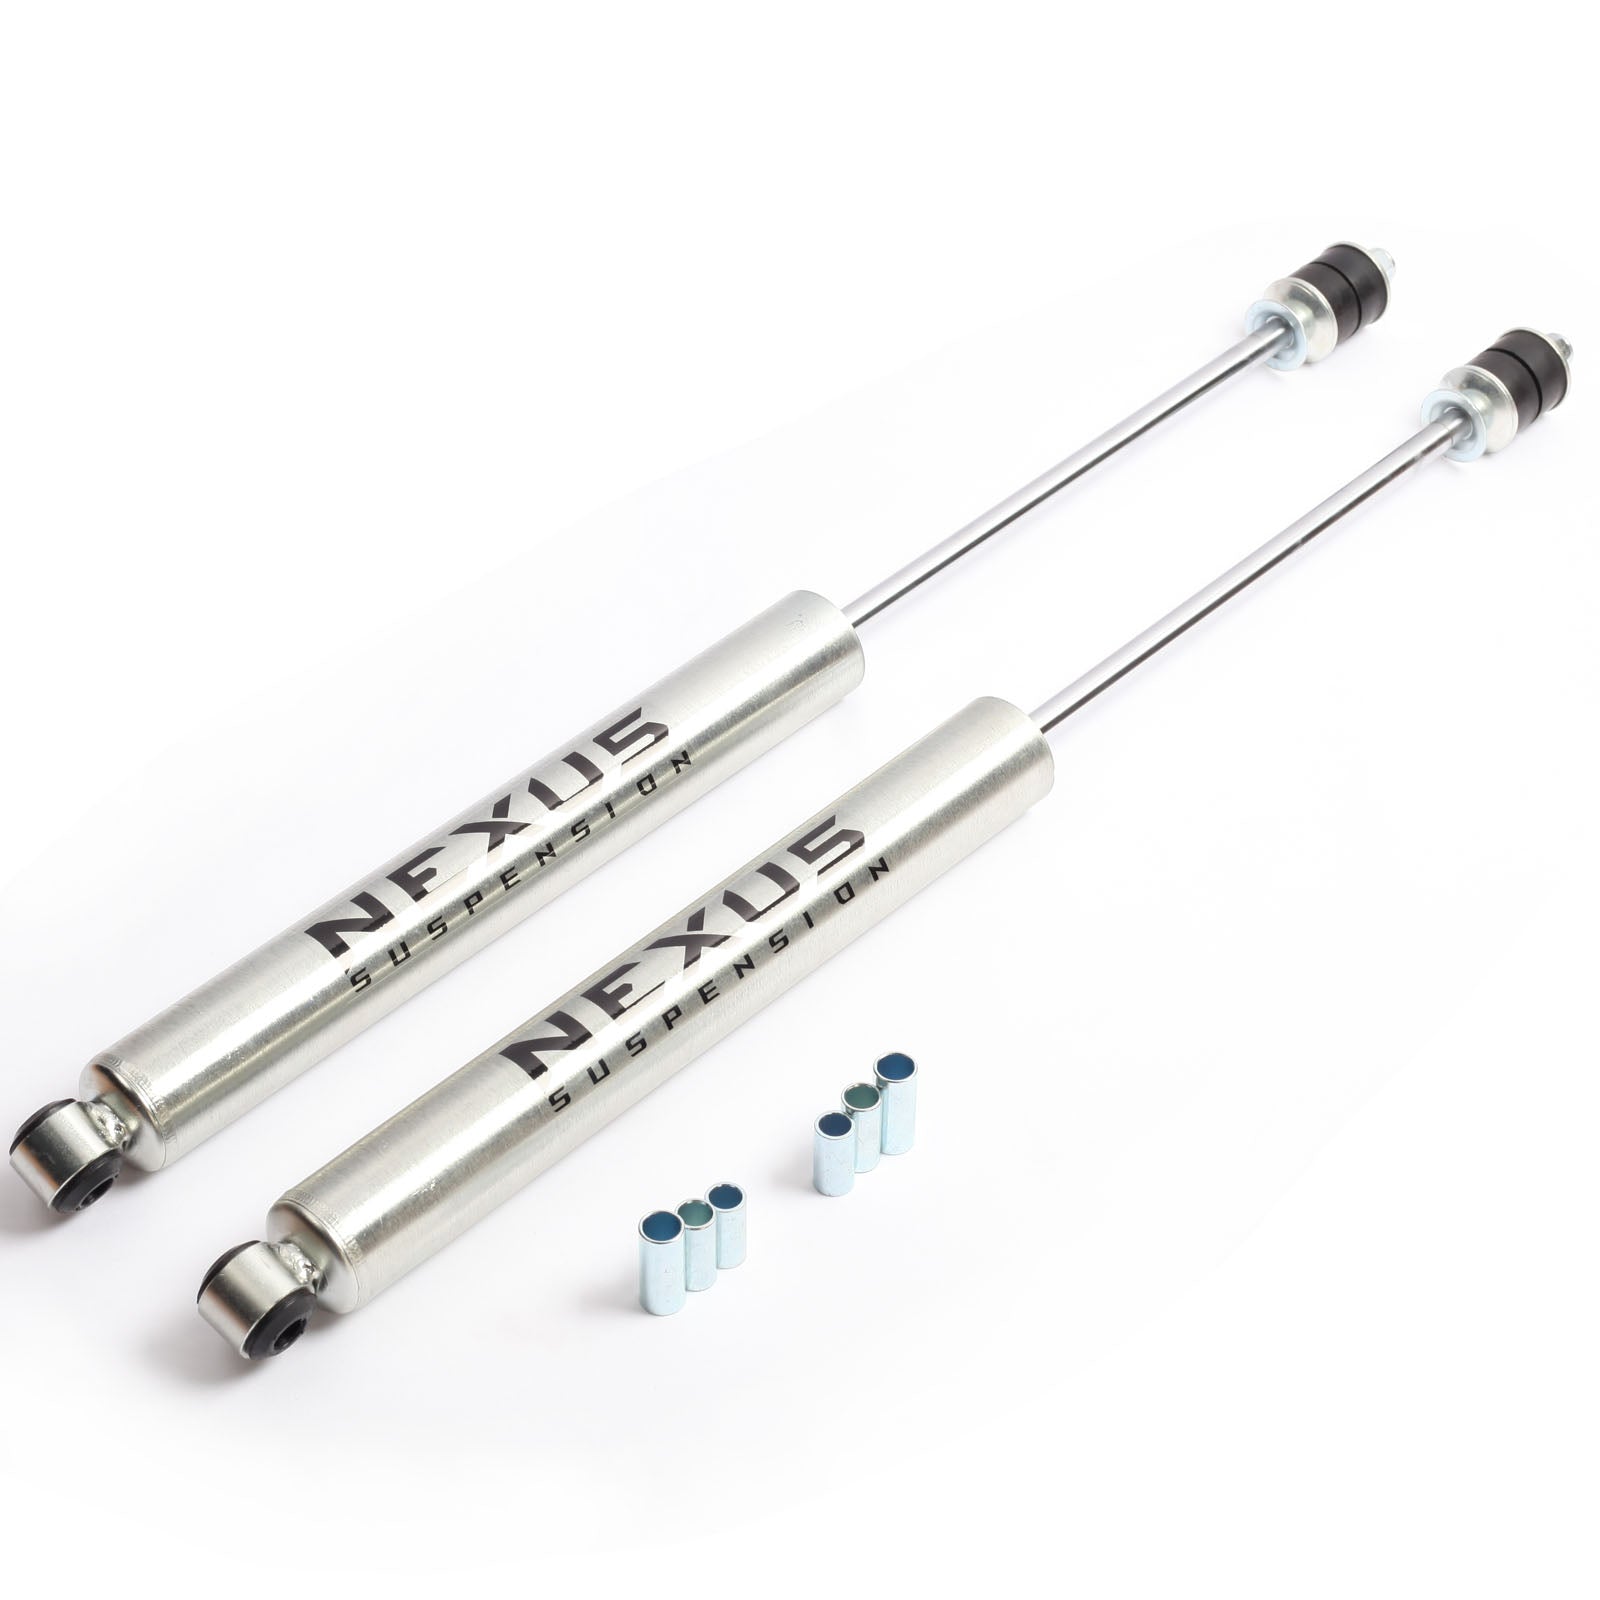 NEXUS SUSPENSION 4 Inch Lift Front Shock Absorber for Jeep Wrangler 1987-1996,Zinc Plated Coating,Pair Pack